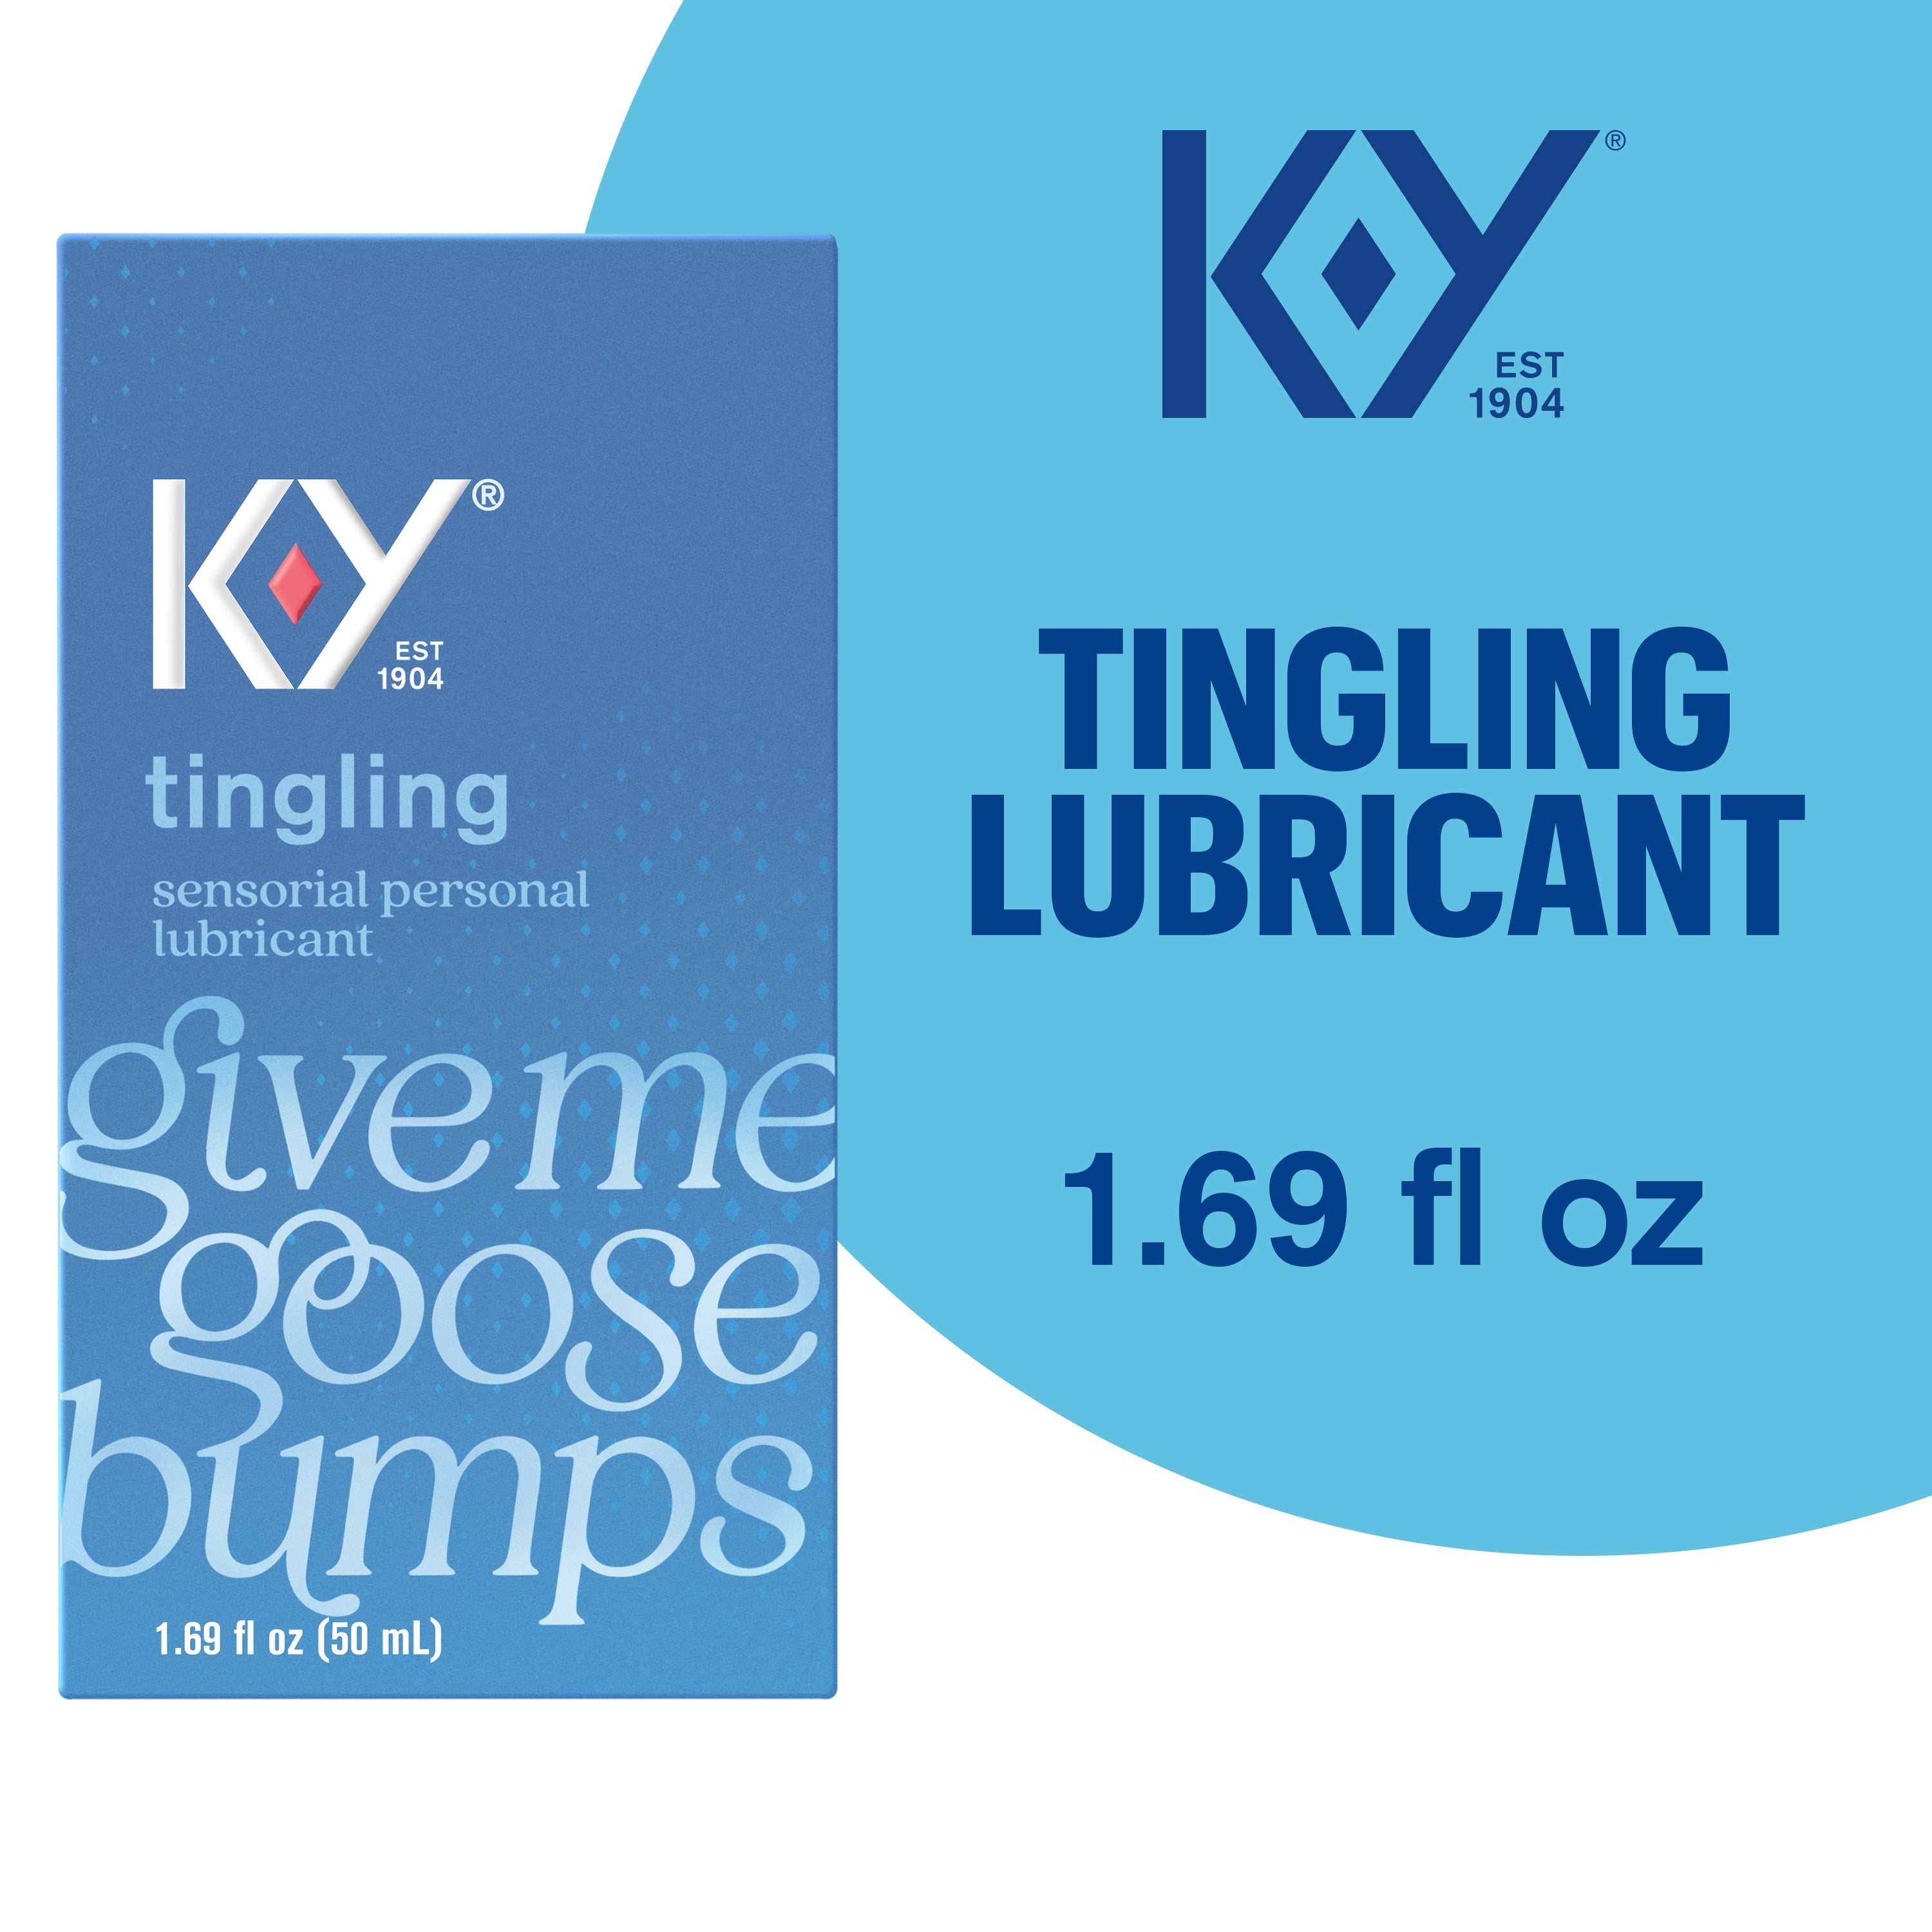 Water Based Lube K-Y Tingling 1.69 fl oz Adult Toy Friendly Personal Lubricant for Couples, Men, Women, Pleasure Enhancer, Sensual Massage Vaginal Moisturizer, pH Balanced, Paraben Free, Non-Greasy